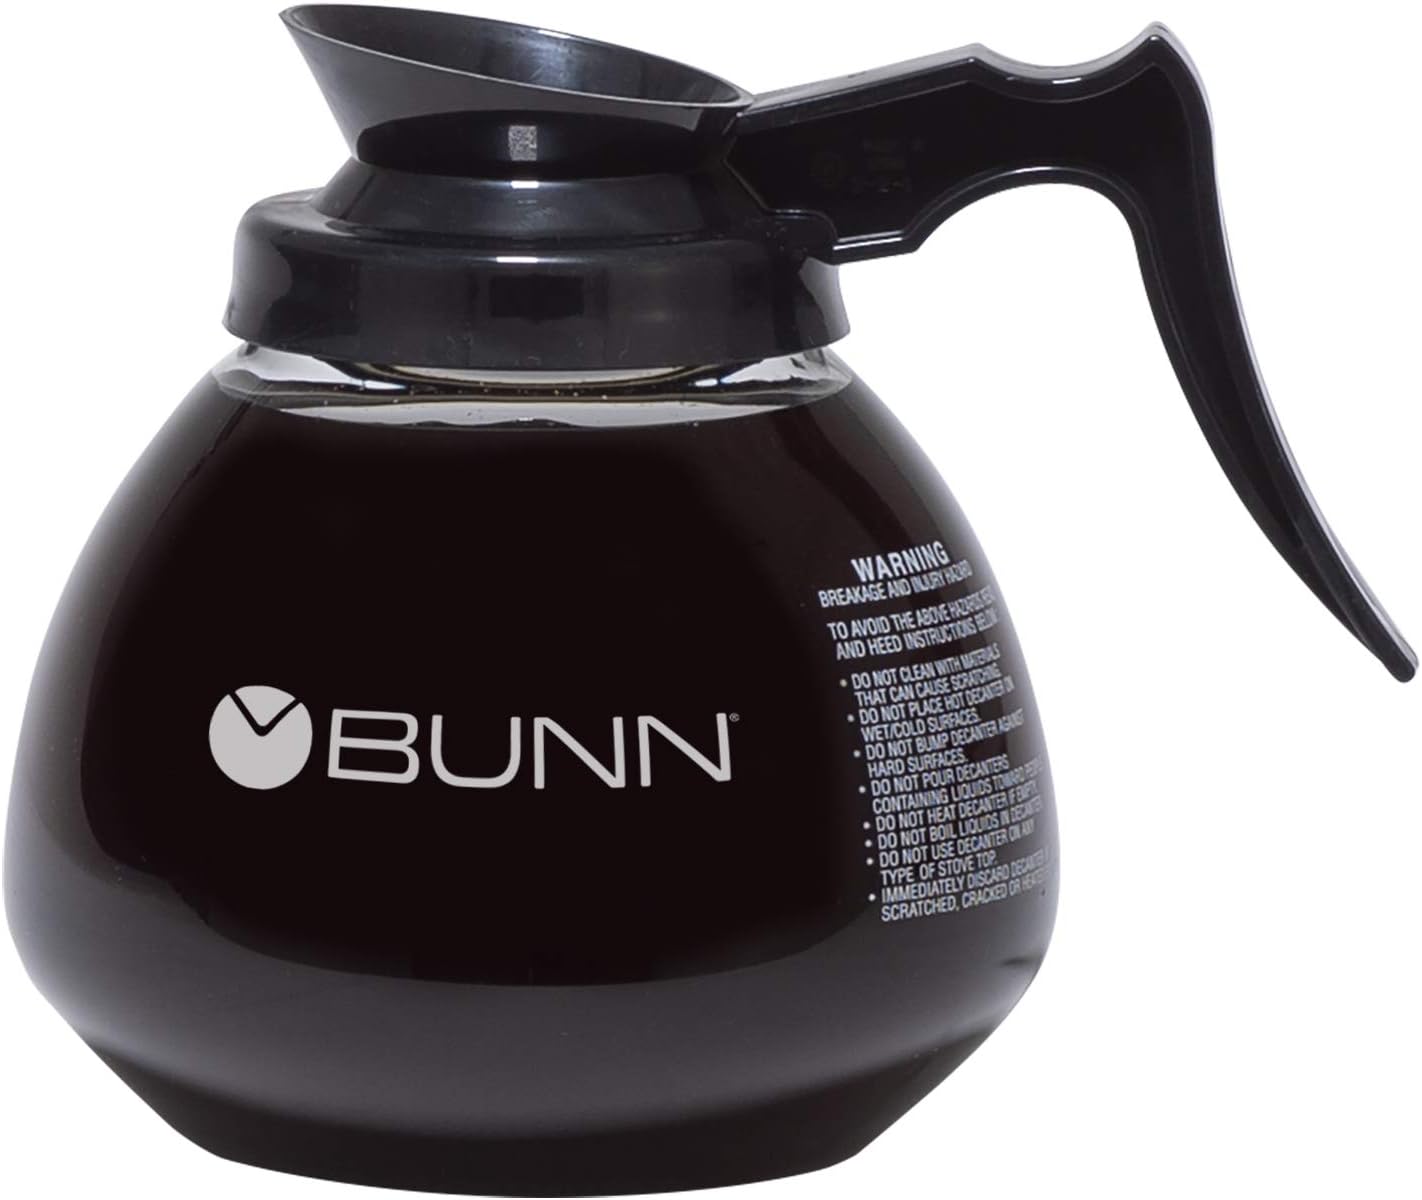 Bunn Axiom Dv-3, Dual Voltage Automatic Commercial 12-Cup Coffee Maker, 3 Lower Warmers, 38700.0009,Grey, 7.5 Gallons